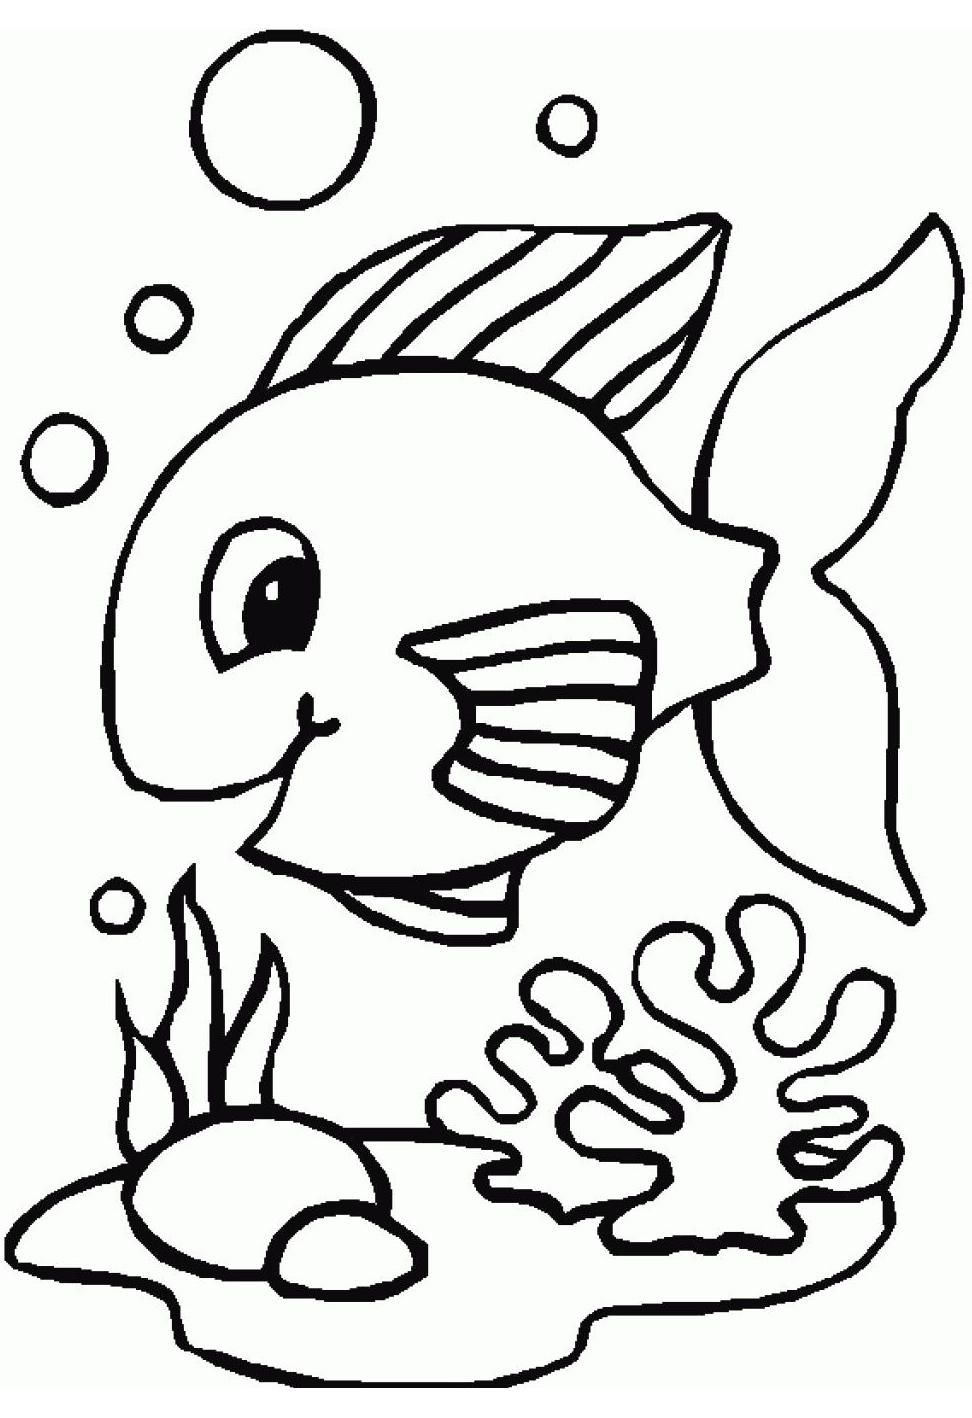 Top 25 Free Printable Fish Coloring Pages Online | Coloring Pages - Free Printable Fish Coloring Pages